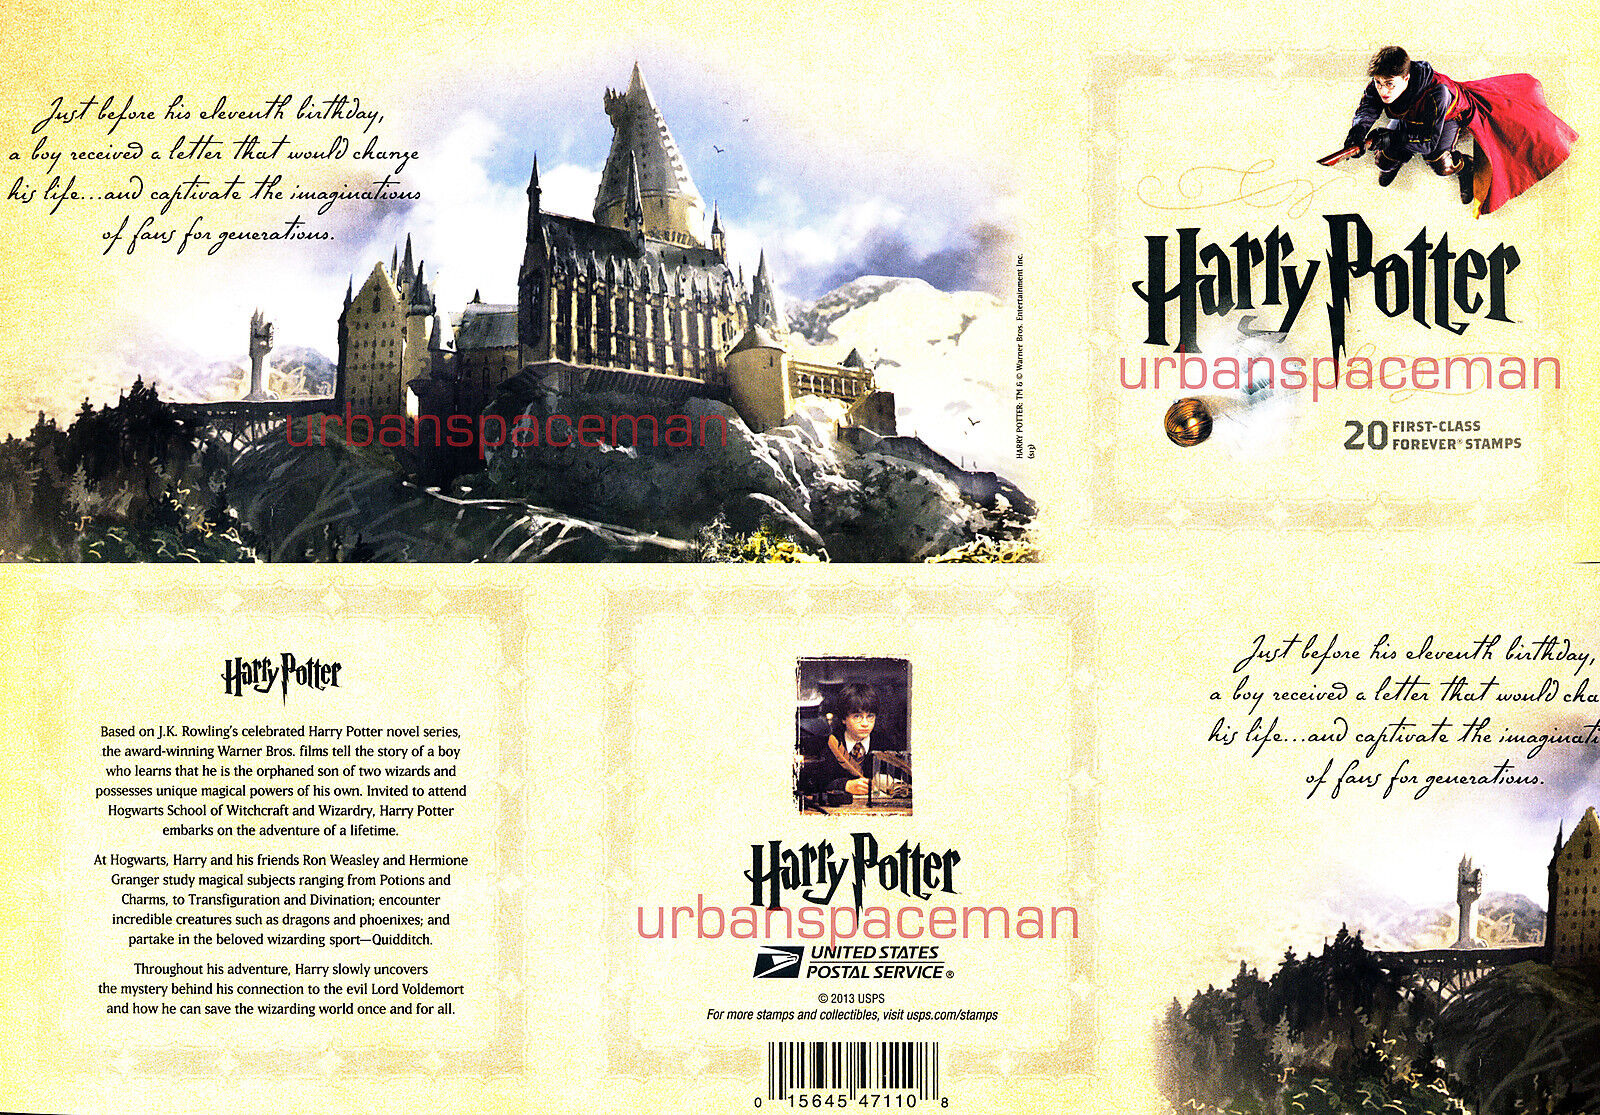 4825-44 Harry Potter Imperforate Booklet of 20 Stamps fr Press Sheet No Die Cuts